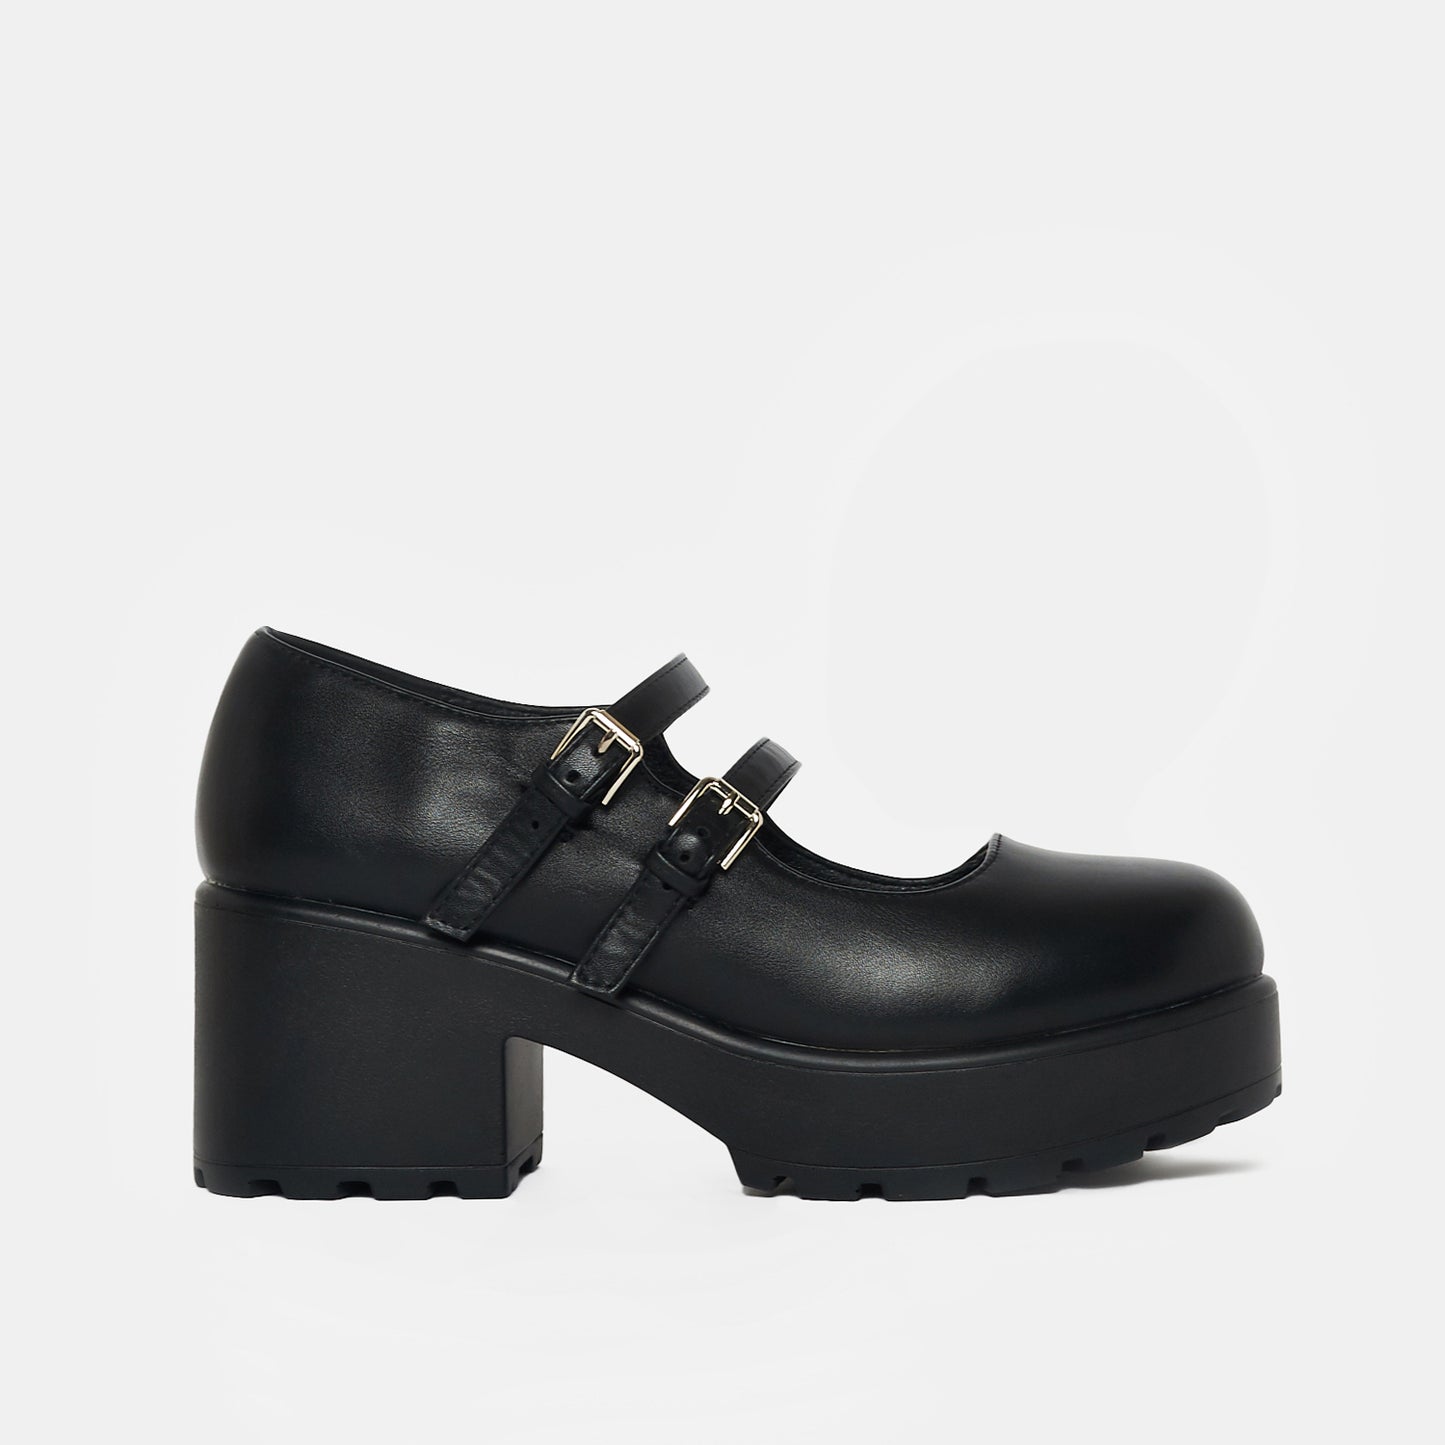 Mura Double Strap Shoes - Mary Janes - KOI Footwear - Black - Side View